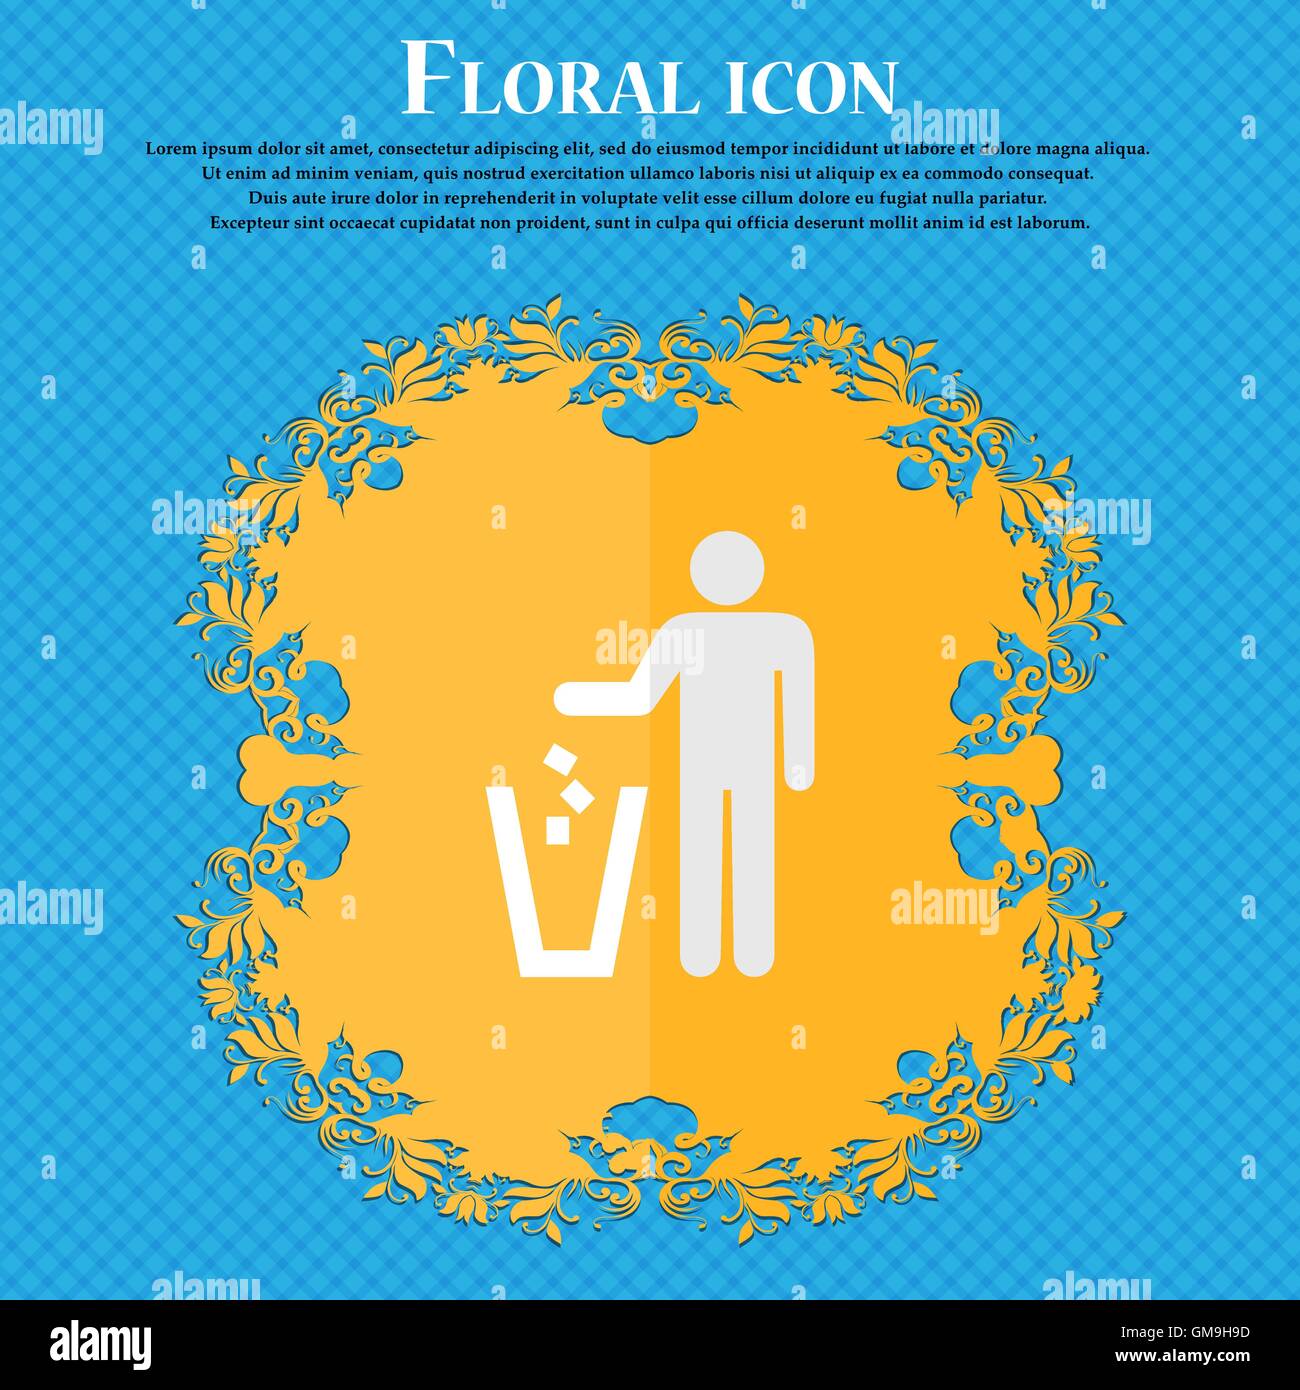 throw away the trash. Floral flat design on a blue abstract background with place for your text. Vector Stock Vector